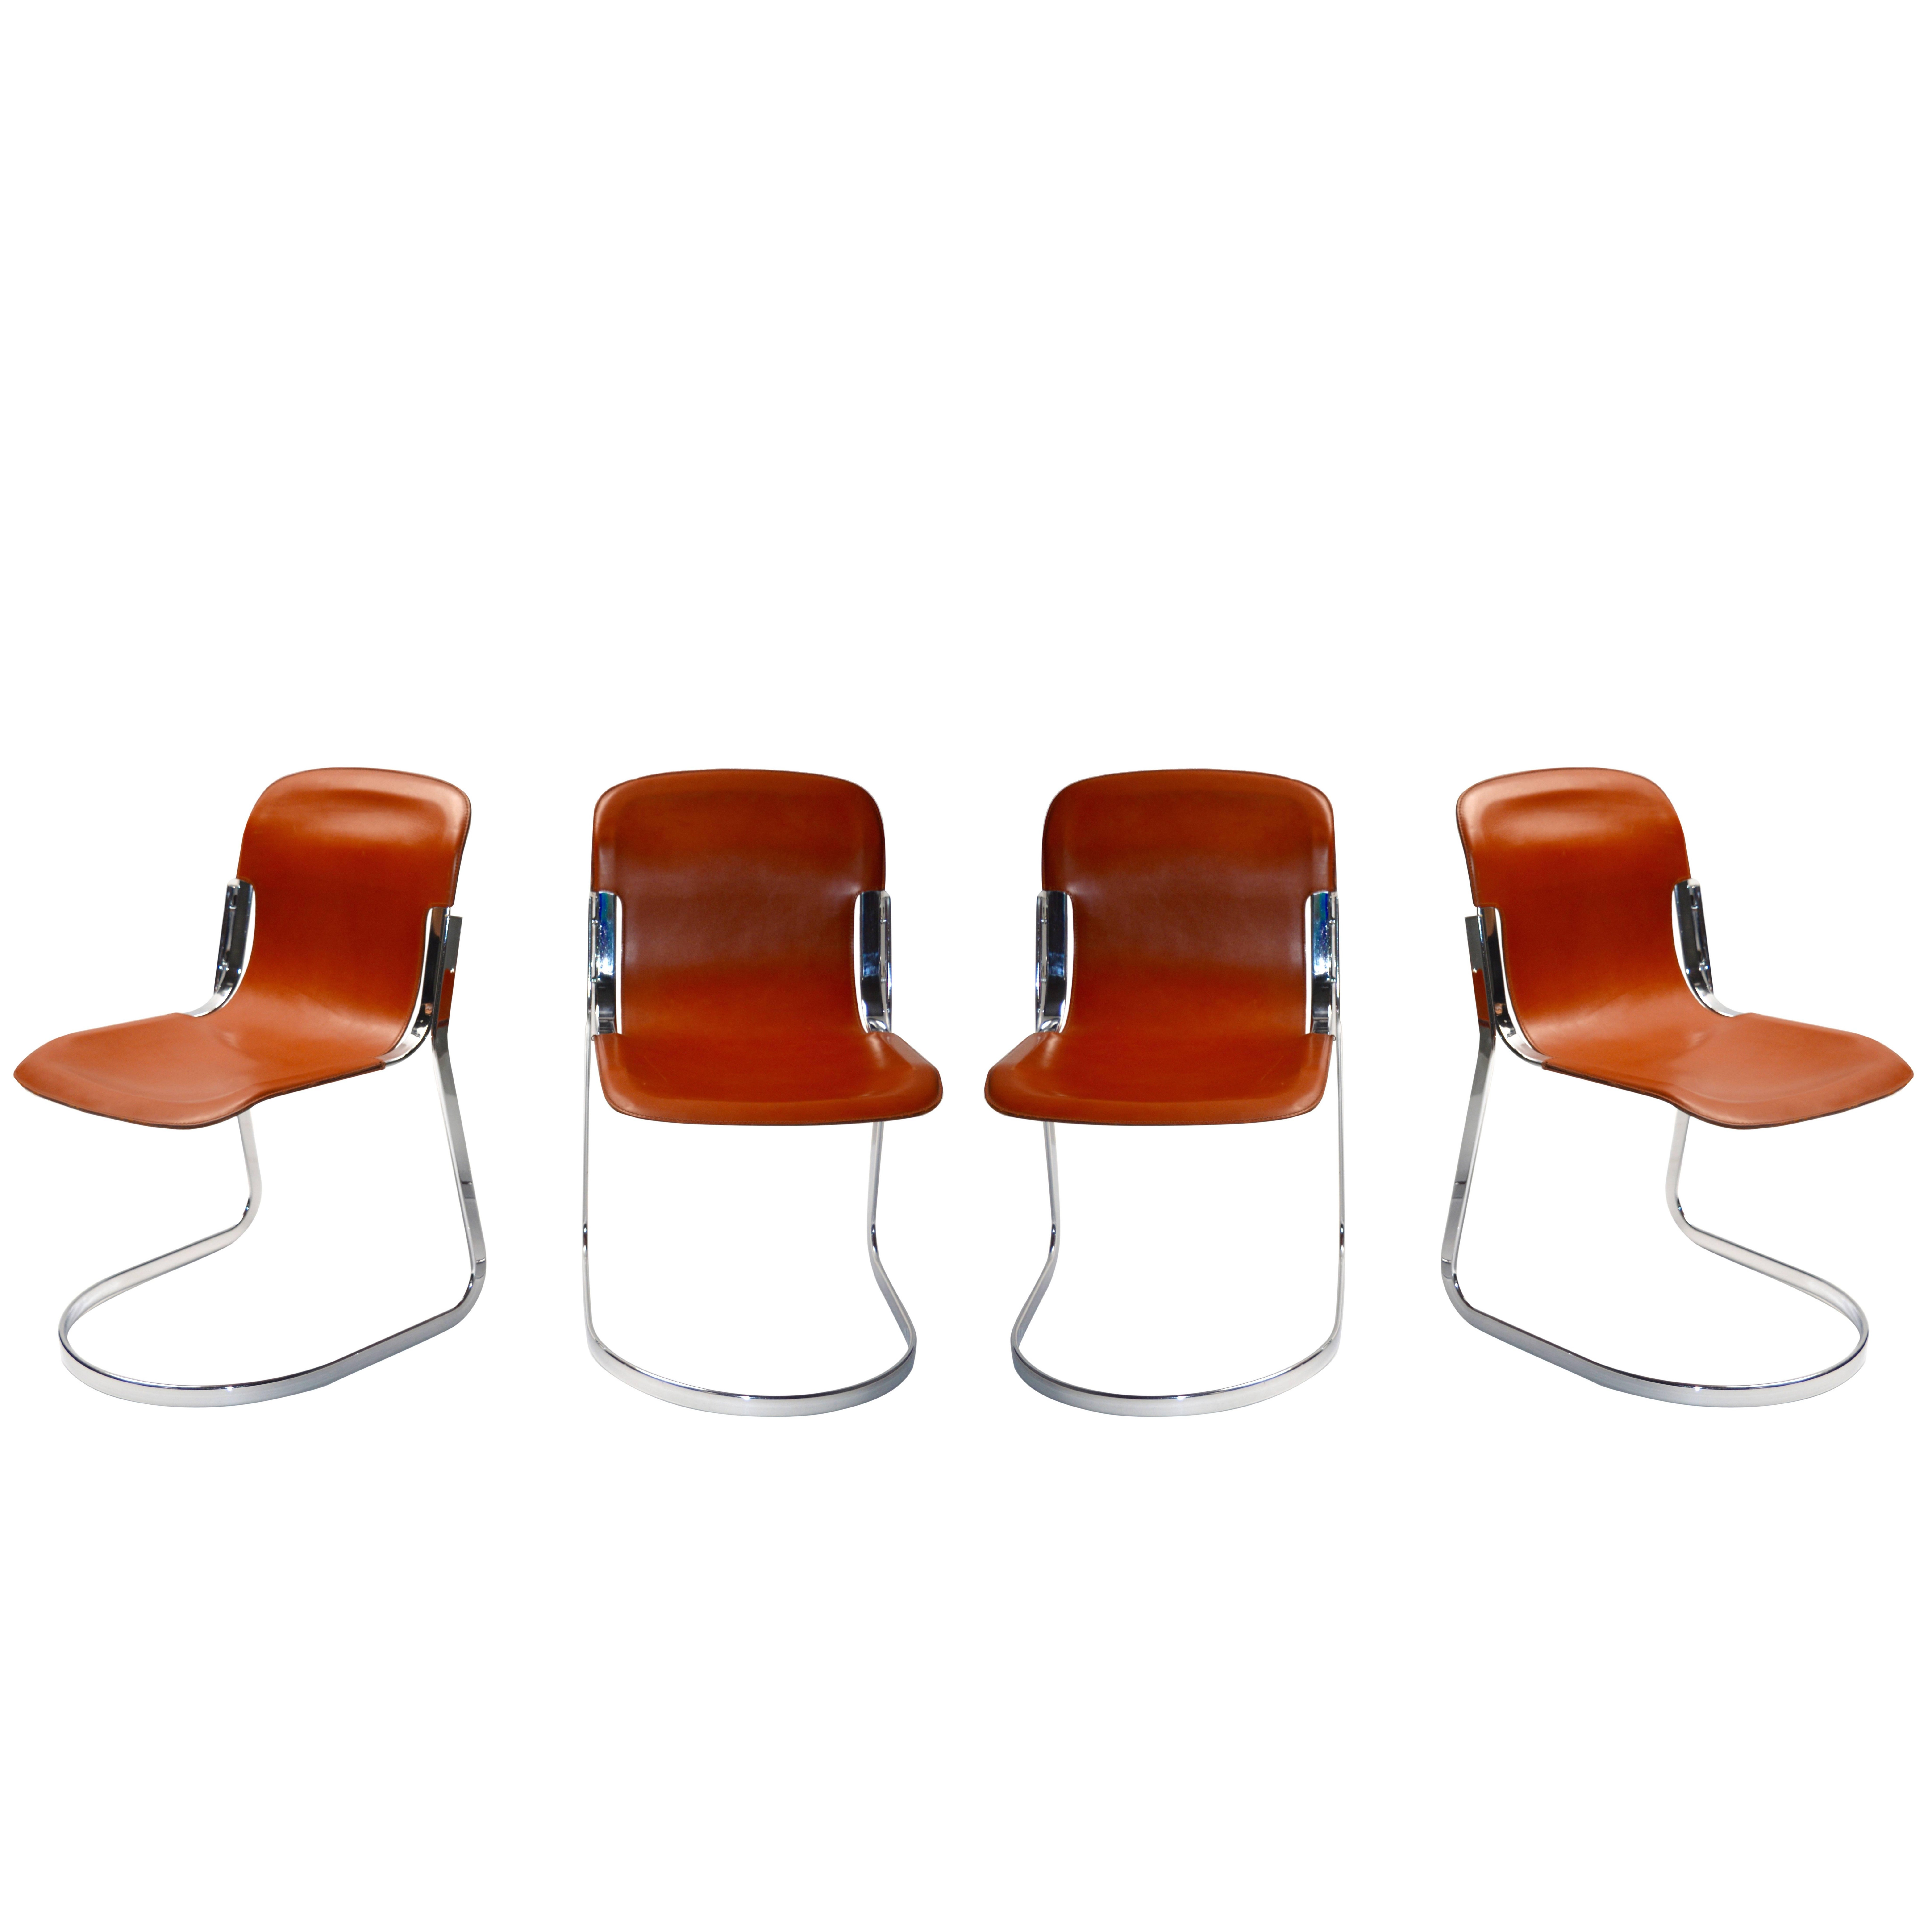 4 Willy Rizzo Italian Steel and Saddle Leather Dining Chairs